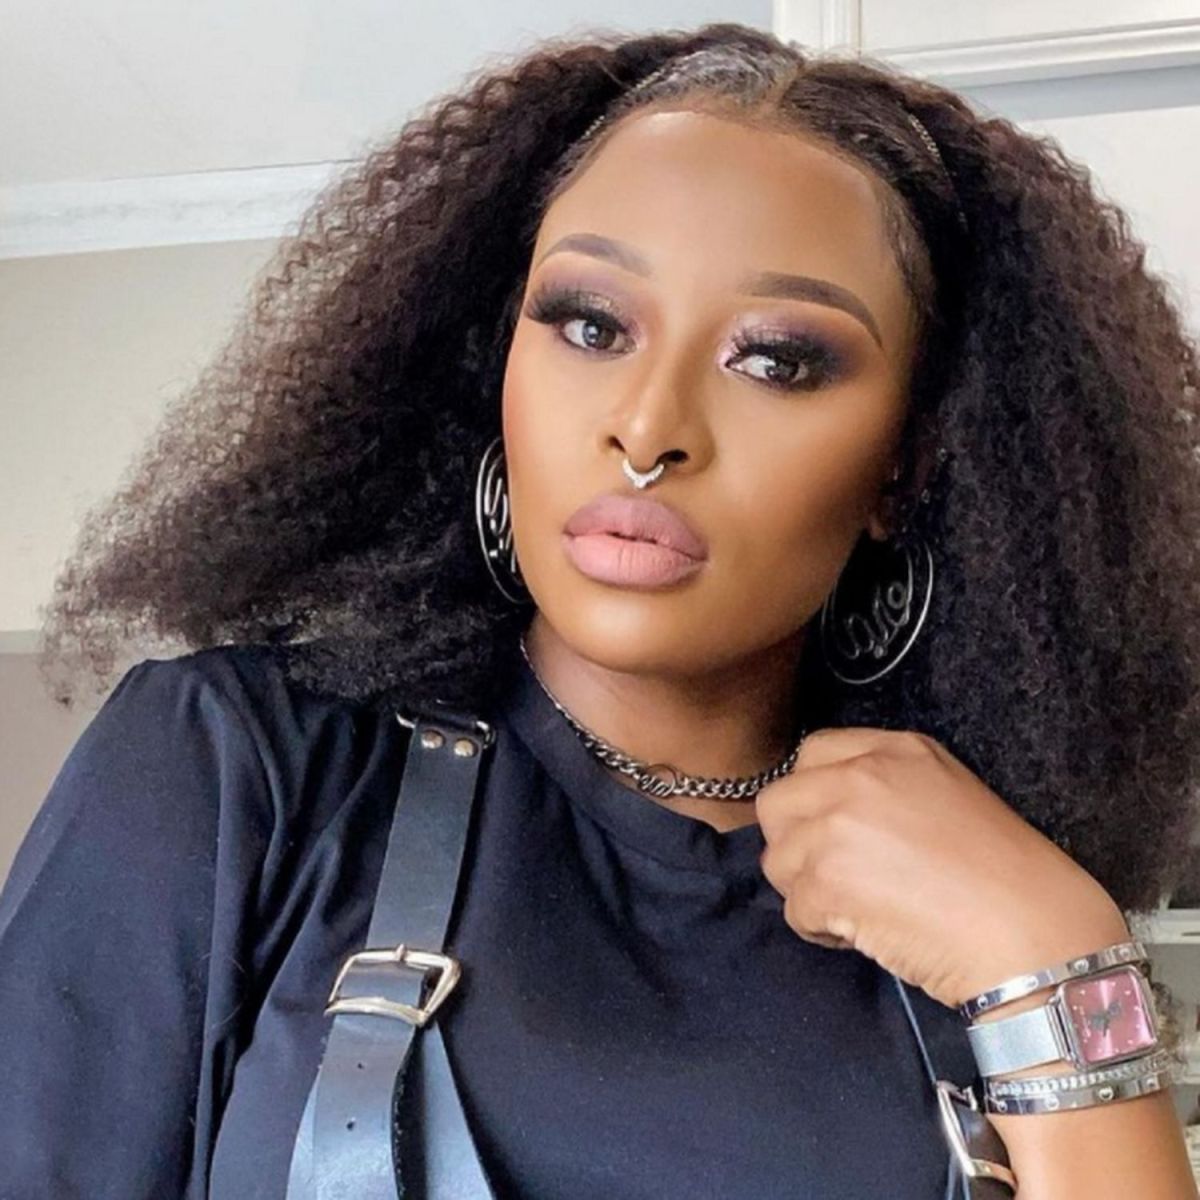 Dj Zinhle Reacts To Backlash Over Not Knowing How To Cook 5